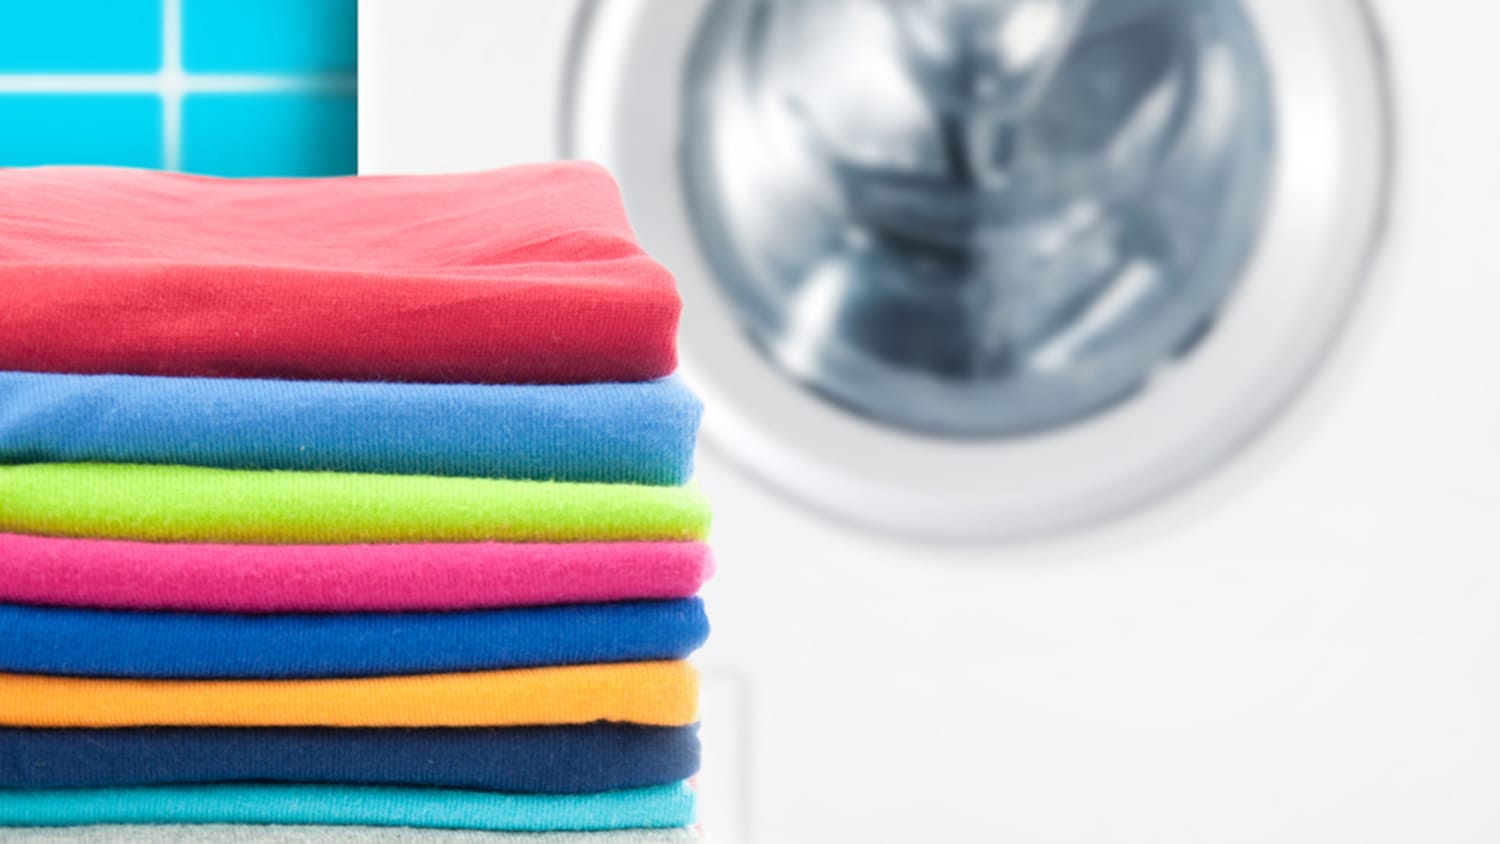 Do you need to wash new clothes before you wear them?